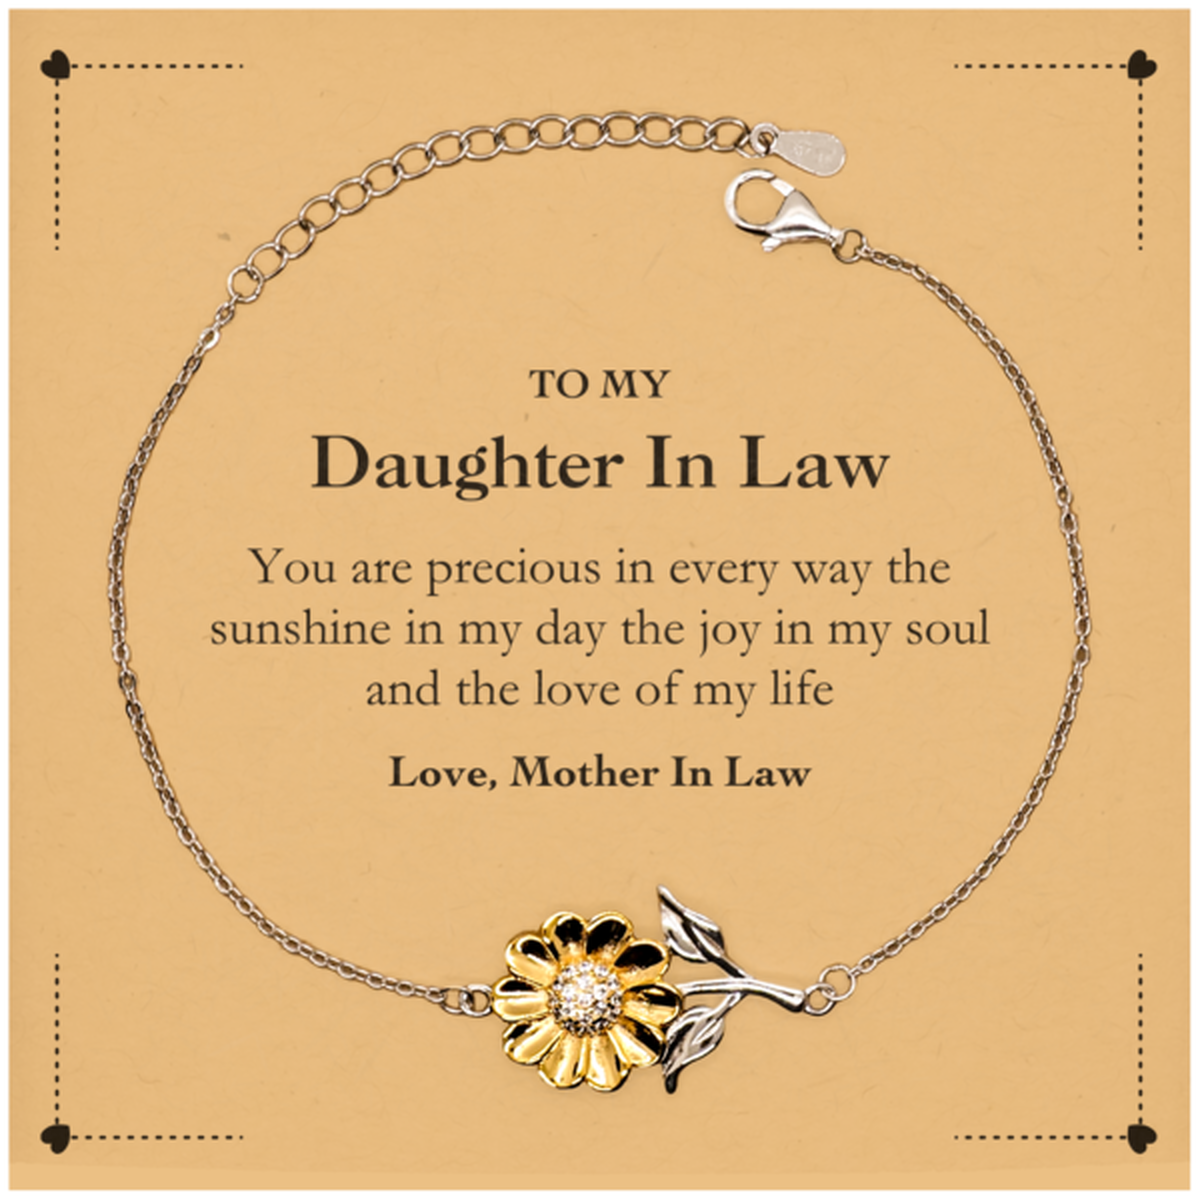 Graduation Gifts for Daughter In Law Sunflower Bracelet Present from Mother In Law, Christmas Daughter In Law Birthday Gifts Daughter In Law You are precious in every way the sunshine in my day. Love, Mother In Law